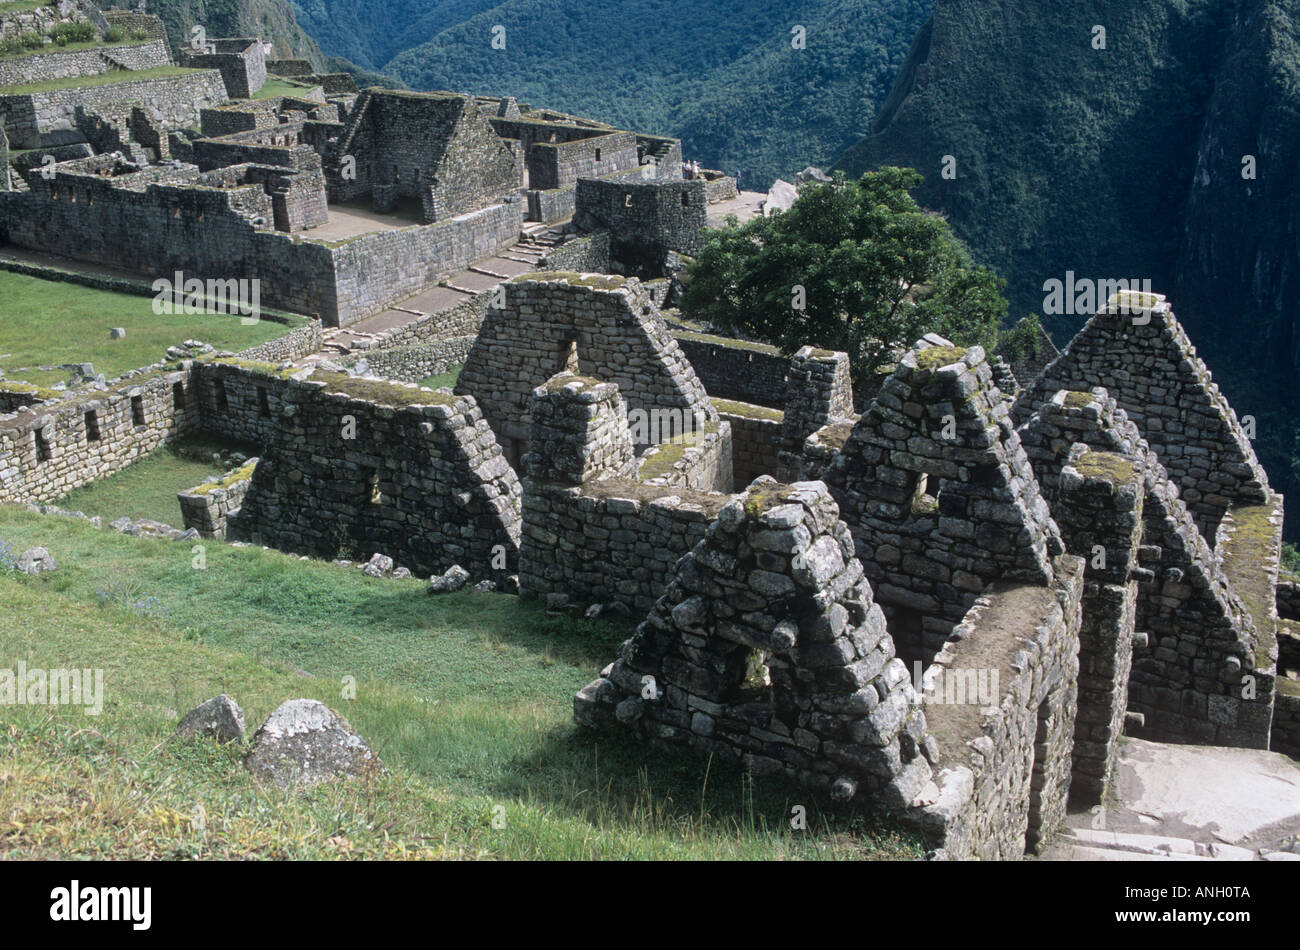 The Incas' masonry skills are still evident in the splendid ruins of Machu Picchu, the sacred city cradled in Peru's mountains Stock Photo